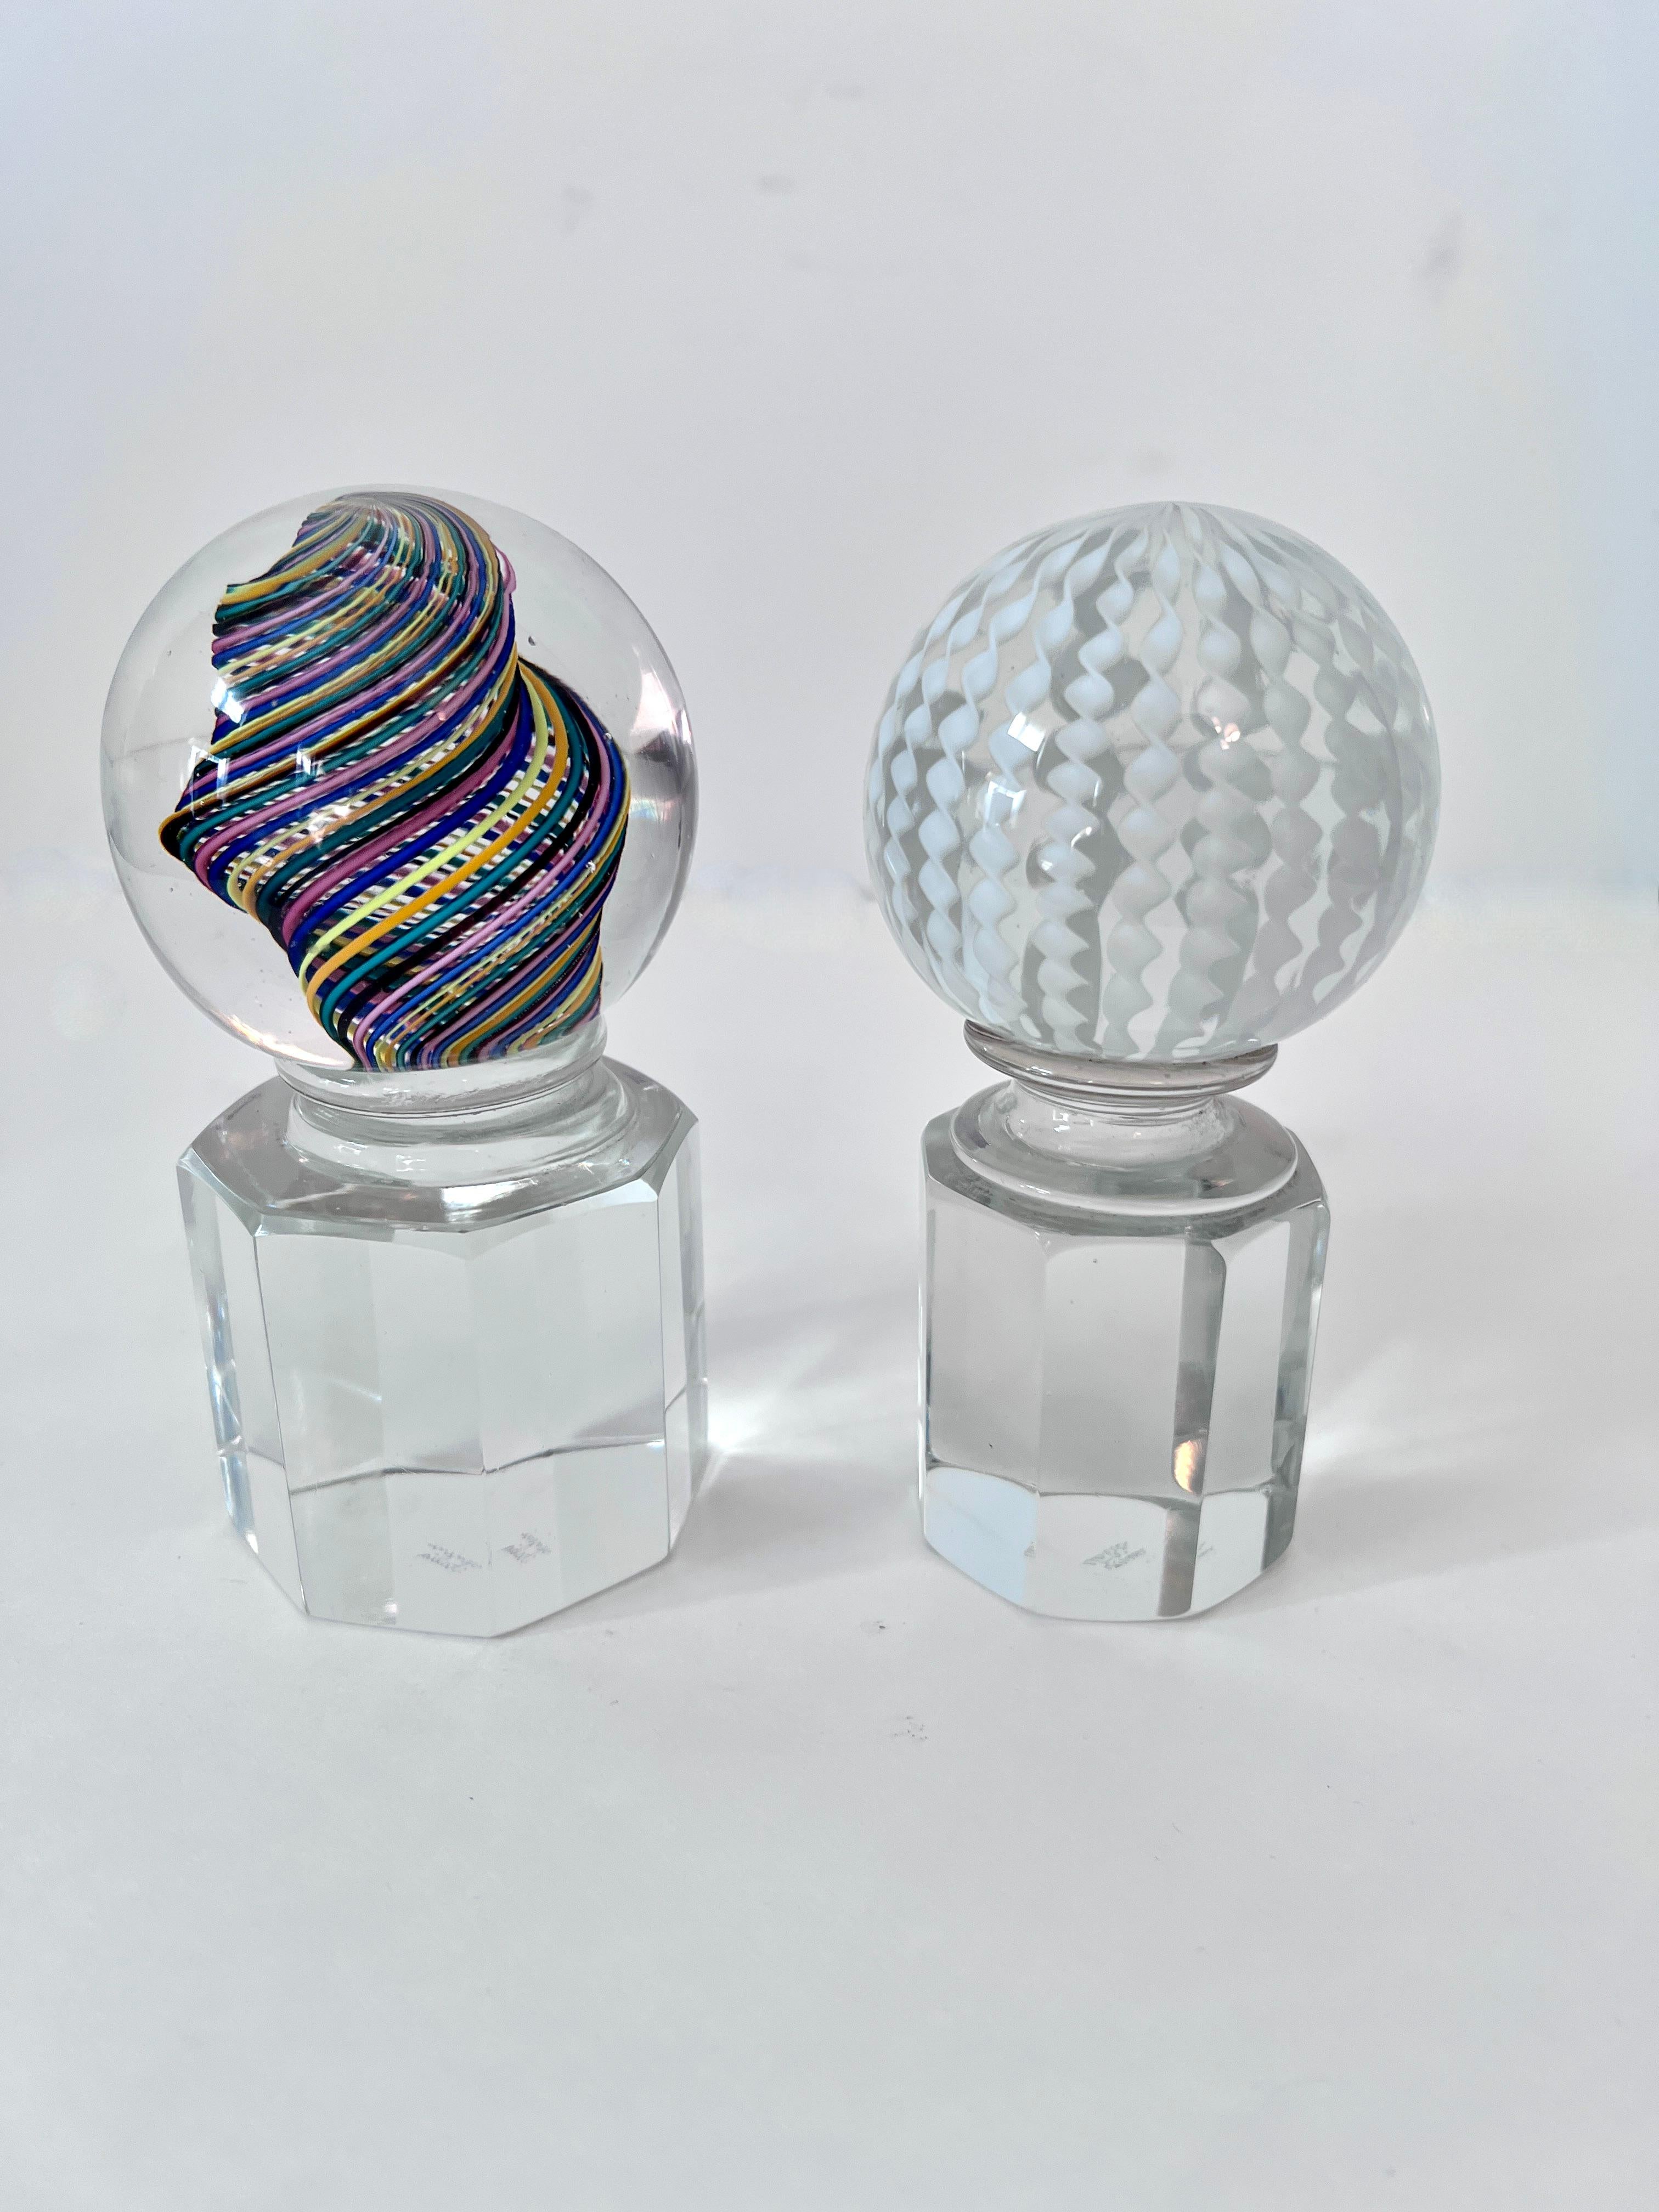 Murano Paperweight by Venini Italy.  This pieces are sold individually or as a pair and are a stunning compliment to any desk or work station.   Hand Crafted with multi colored Ribbons and white ribbons, and of a good weight.  They work well as